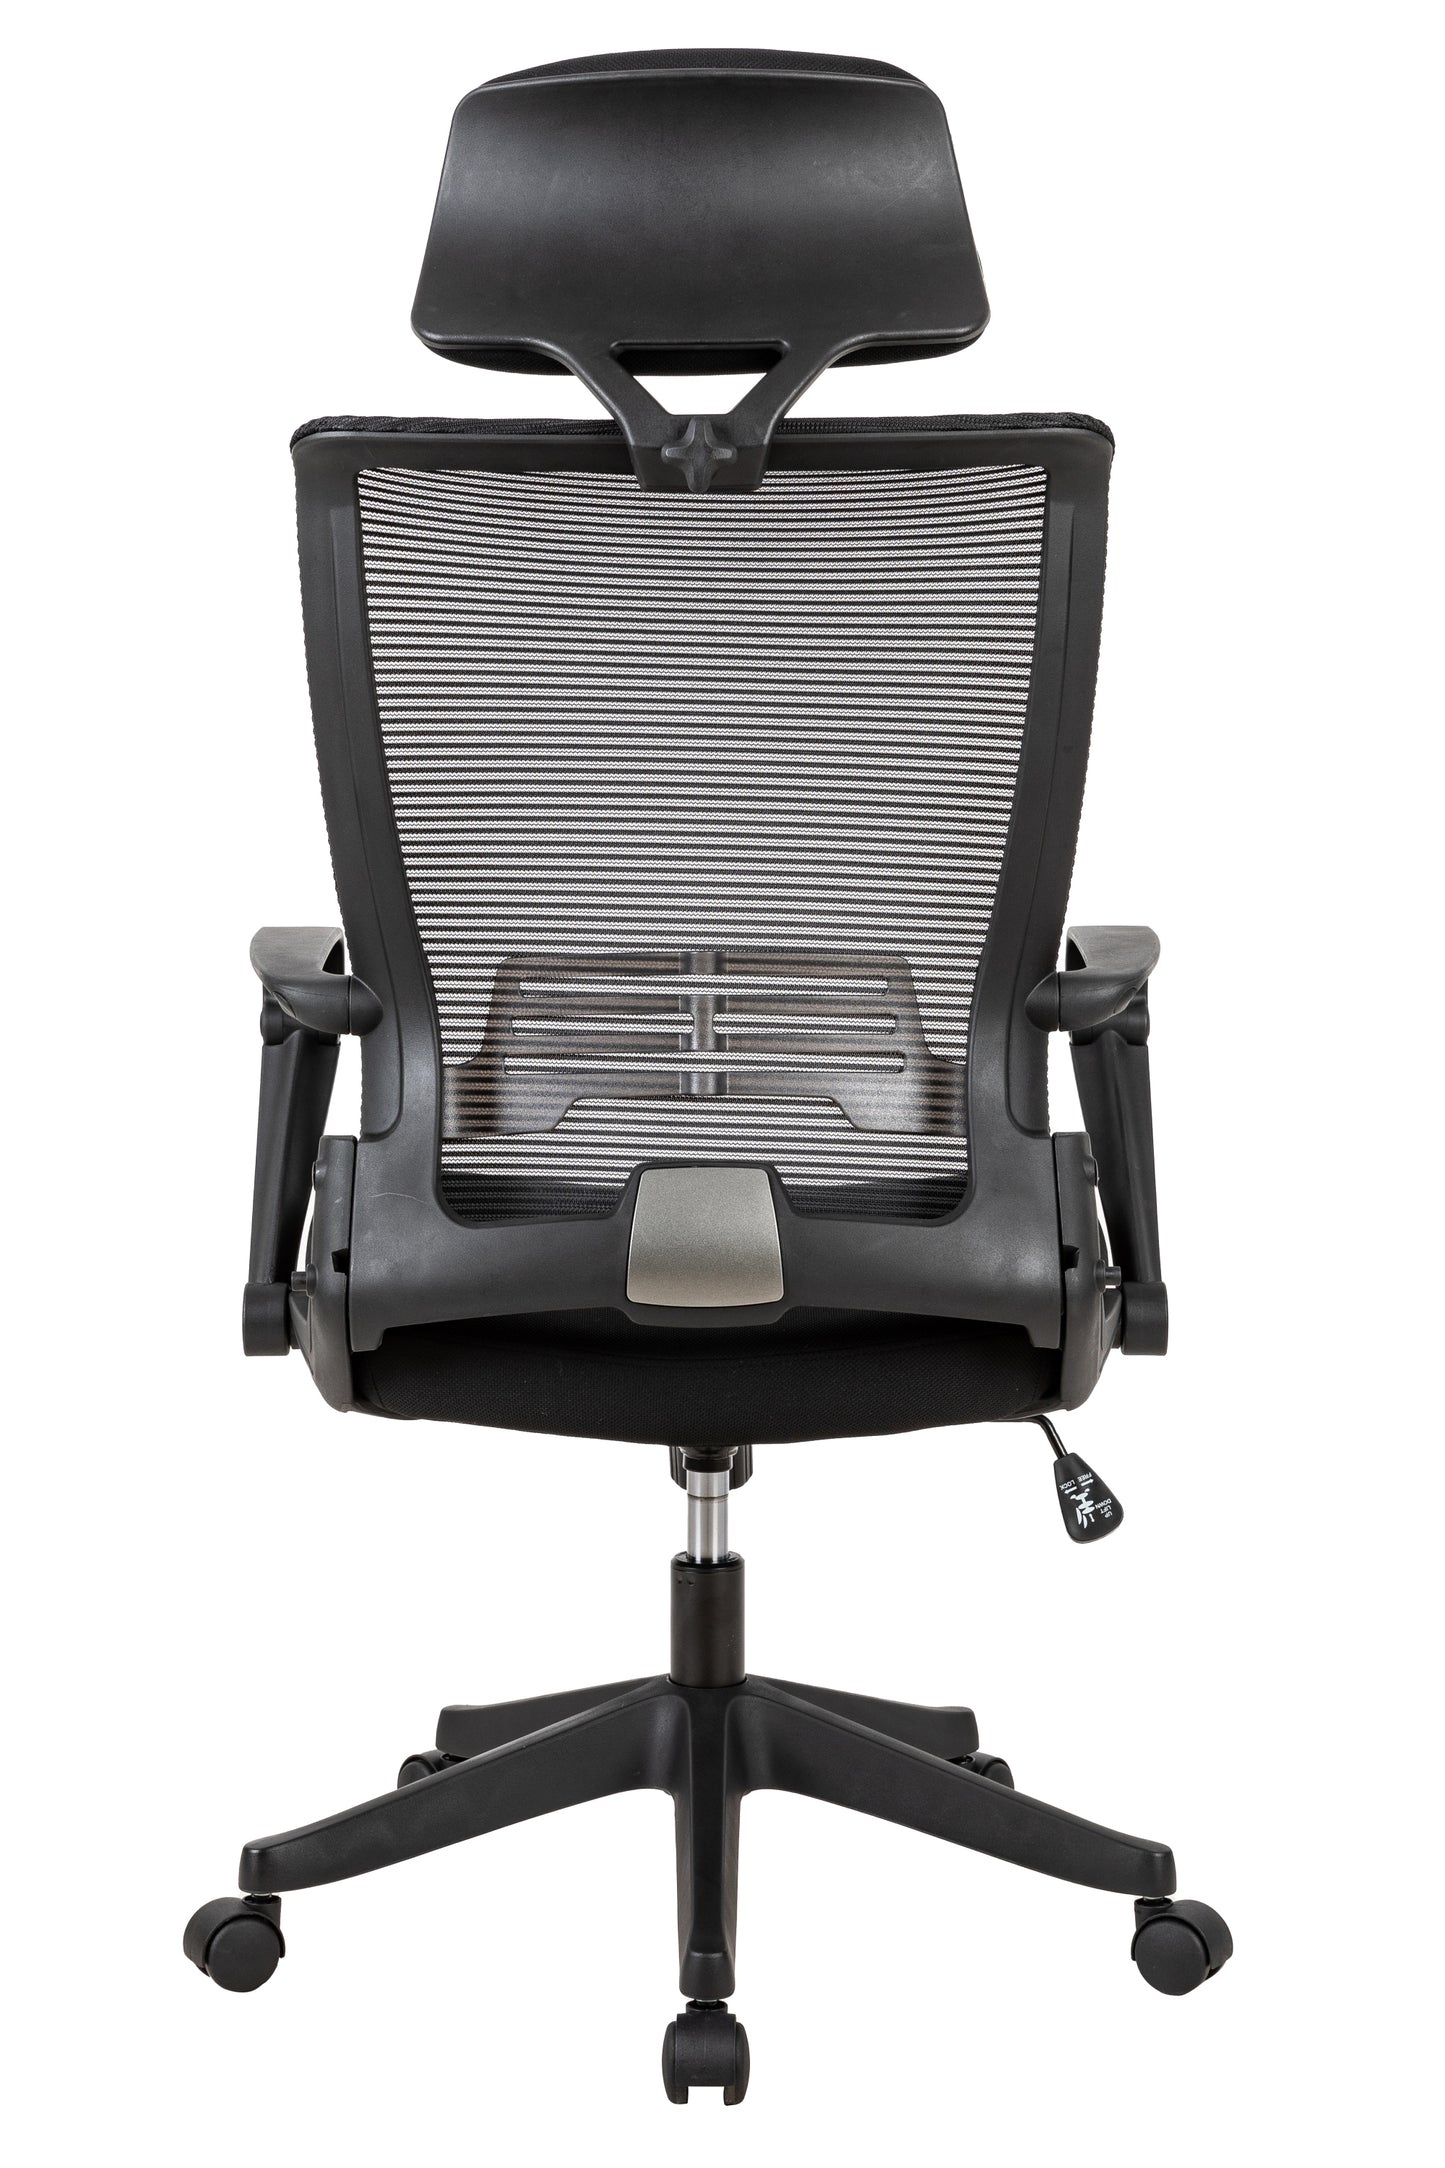 High Back Office Chair with fixed arms and headrest, Black, easy assemble chair